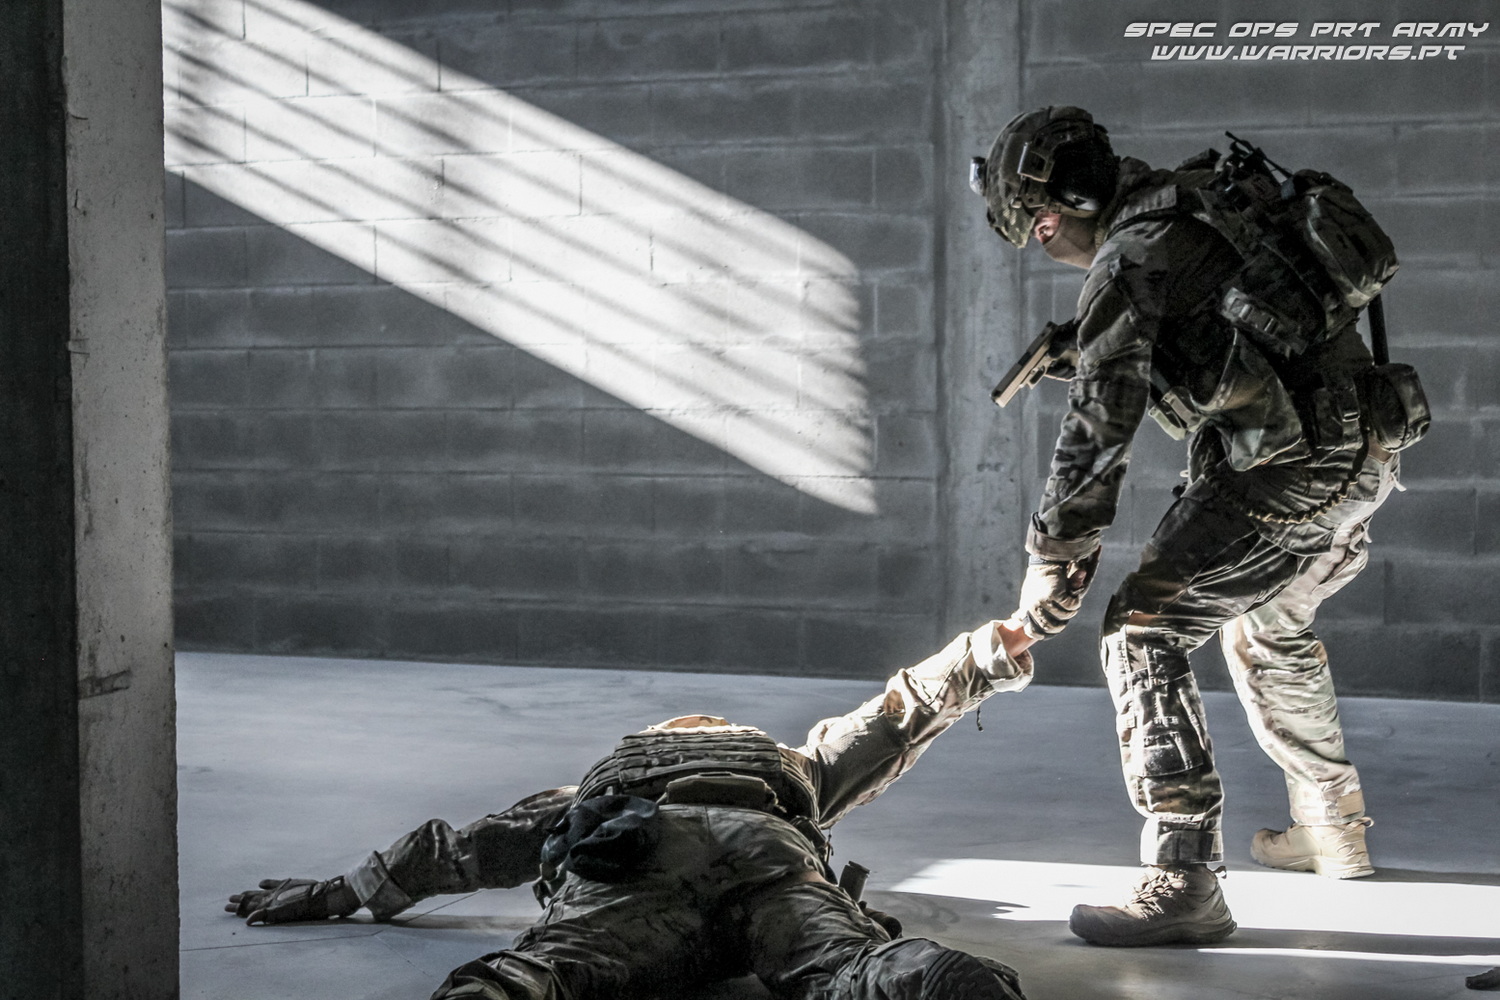 Hand-to-hand combat - Portuguese Army Special Operations